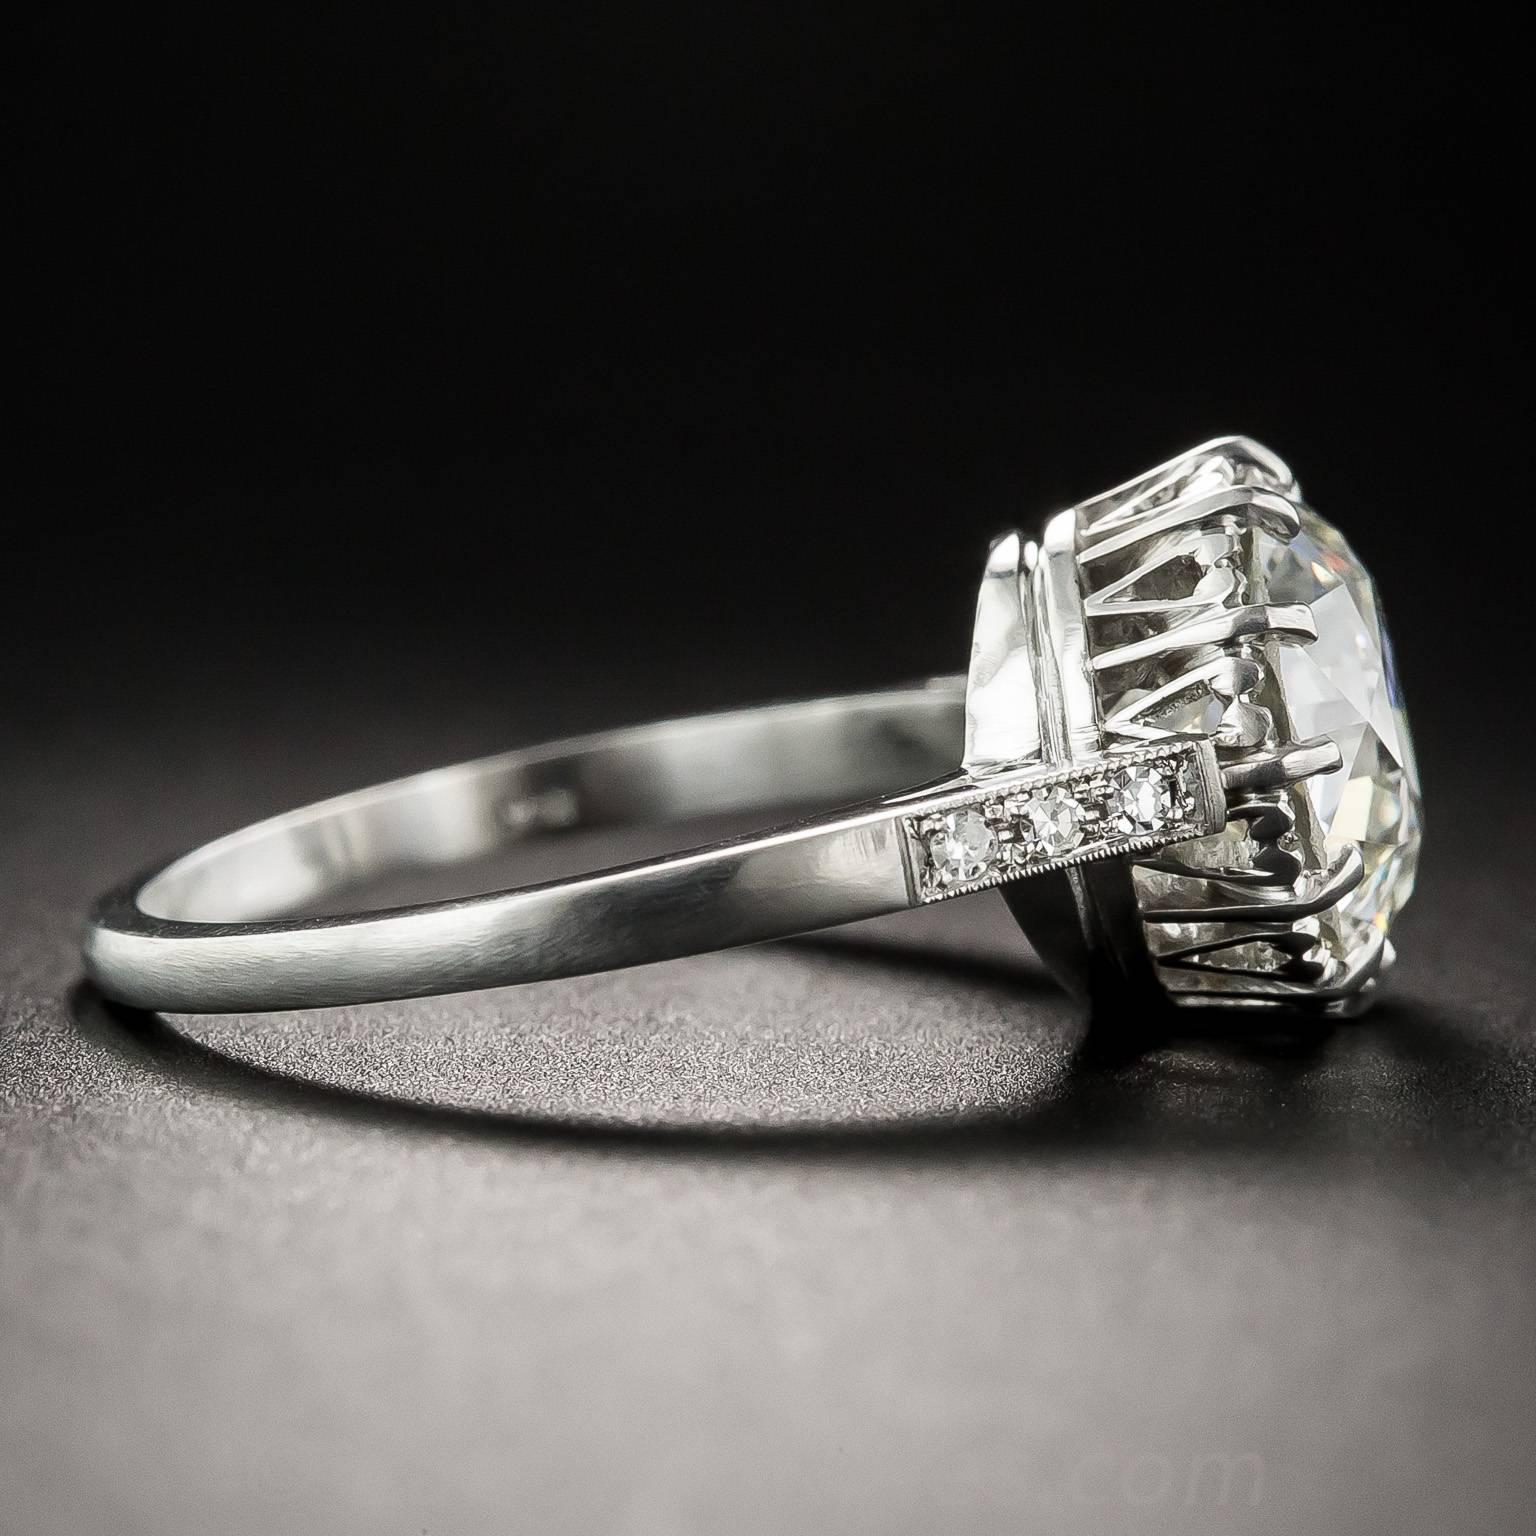 3.36 Carat European-Cut Diamond Solitaire Ring - GIA J VS2 In Excellent Condition For Sale In San Francisco, CA